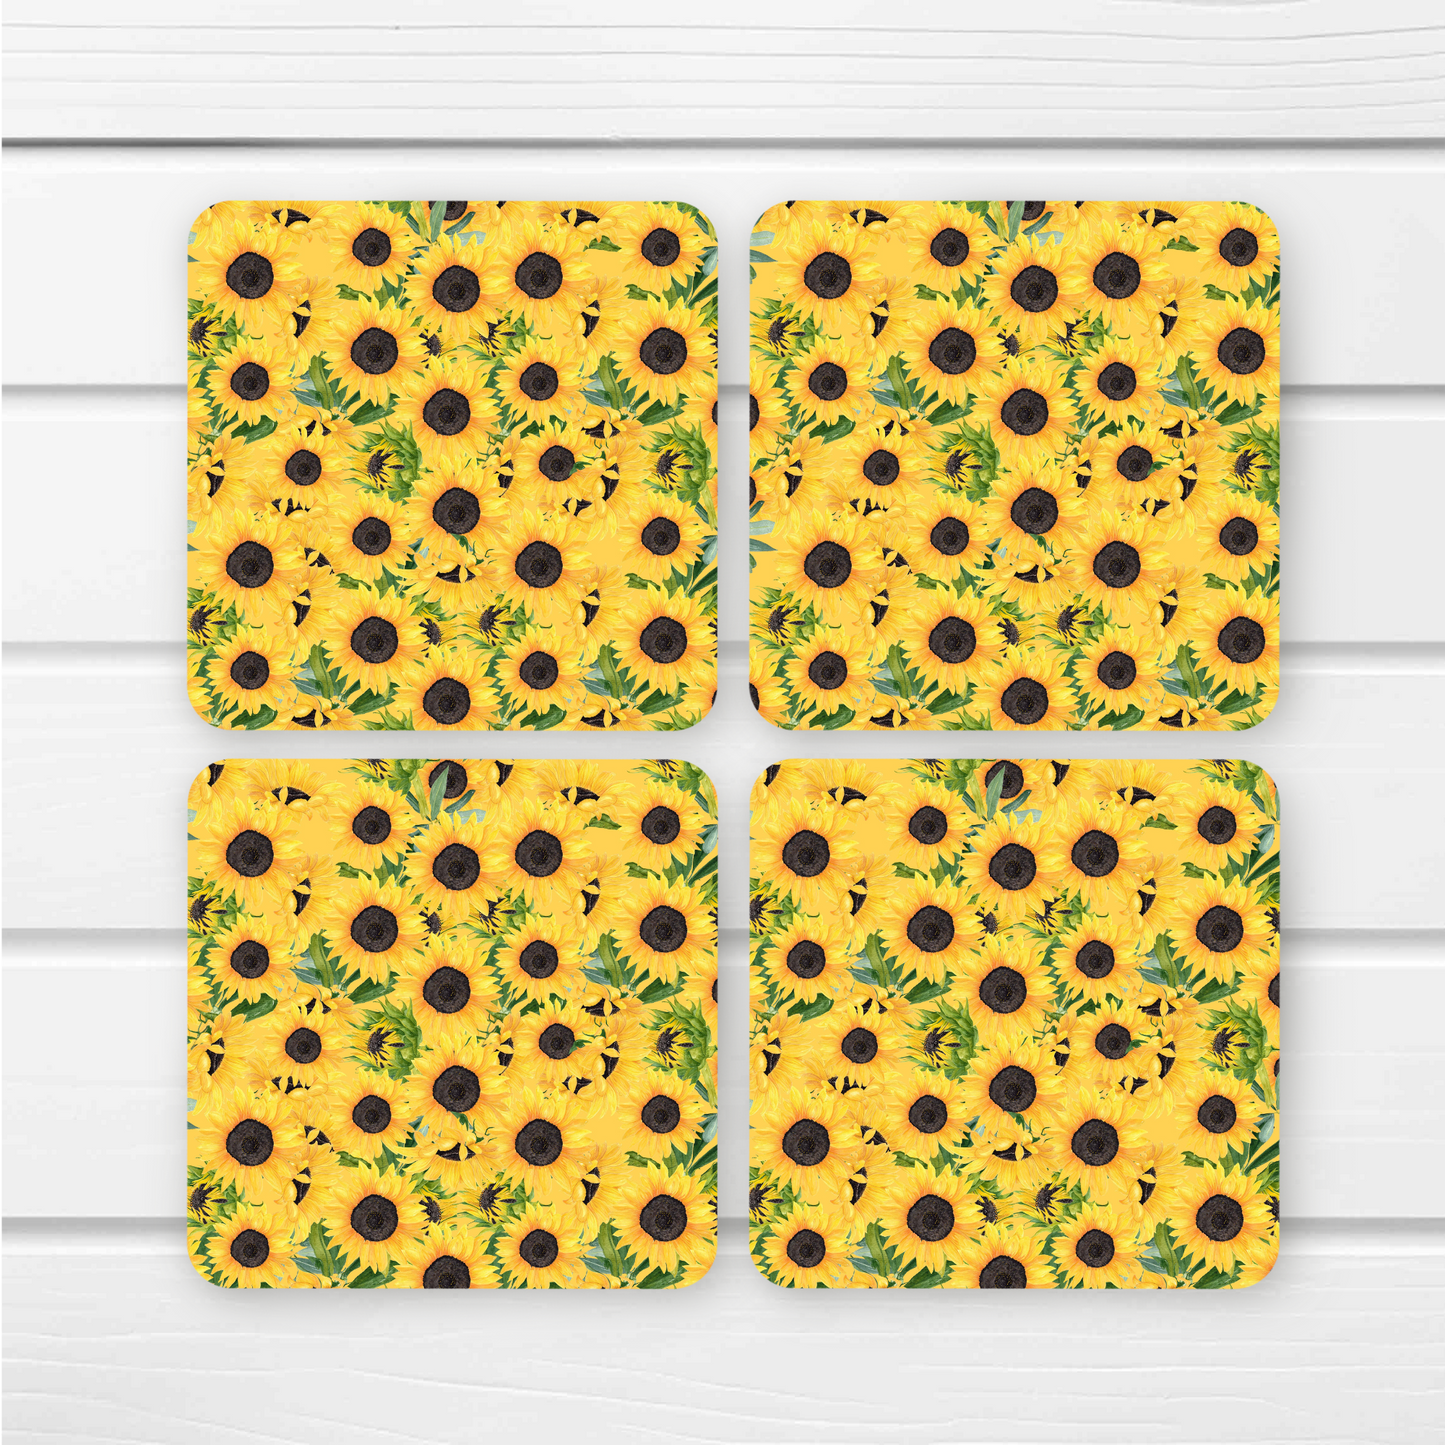 Beautifully Printed  Sunflowers Wooden Coasters for Stylish Home Décor